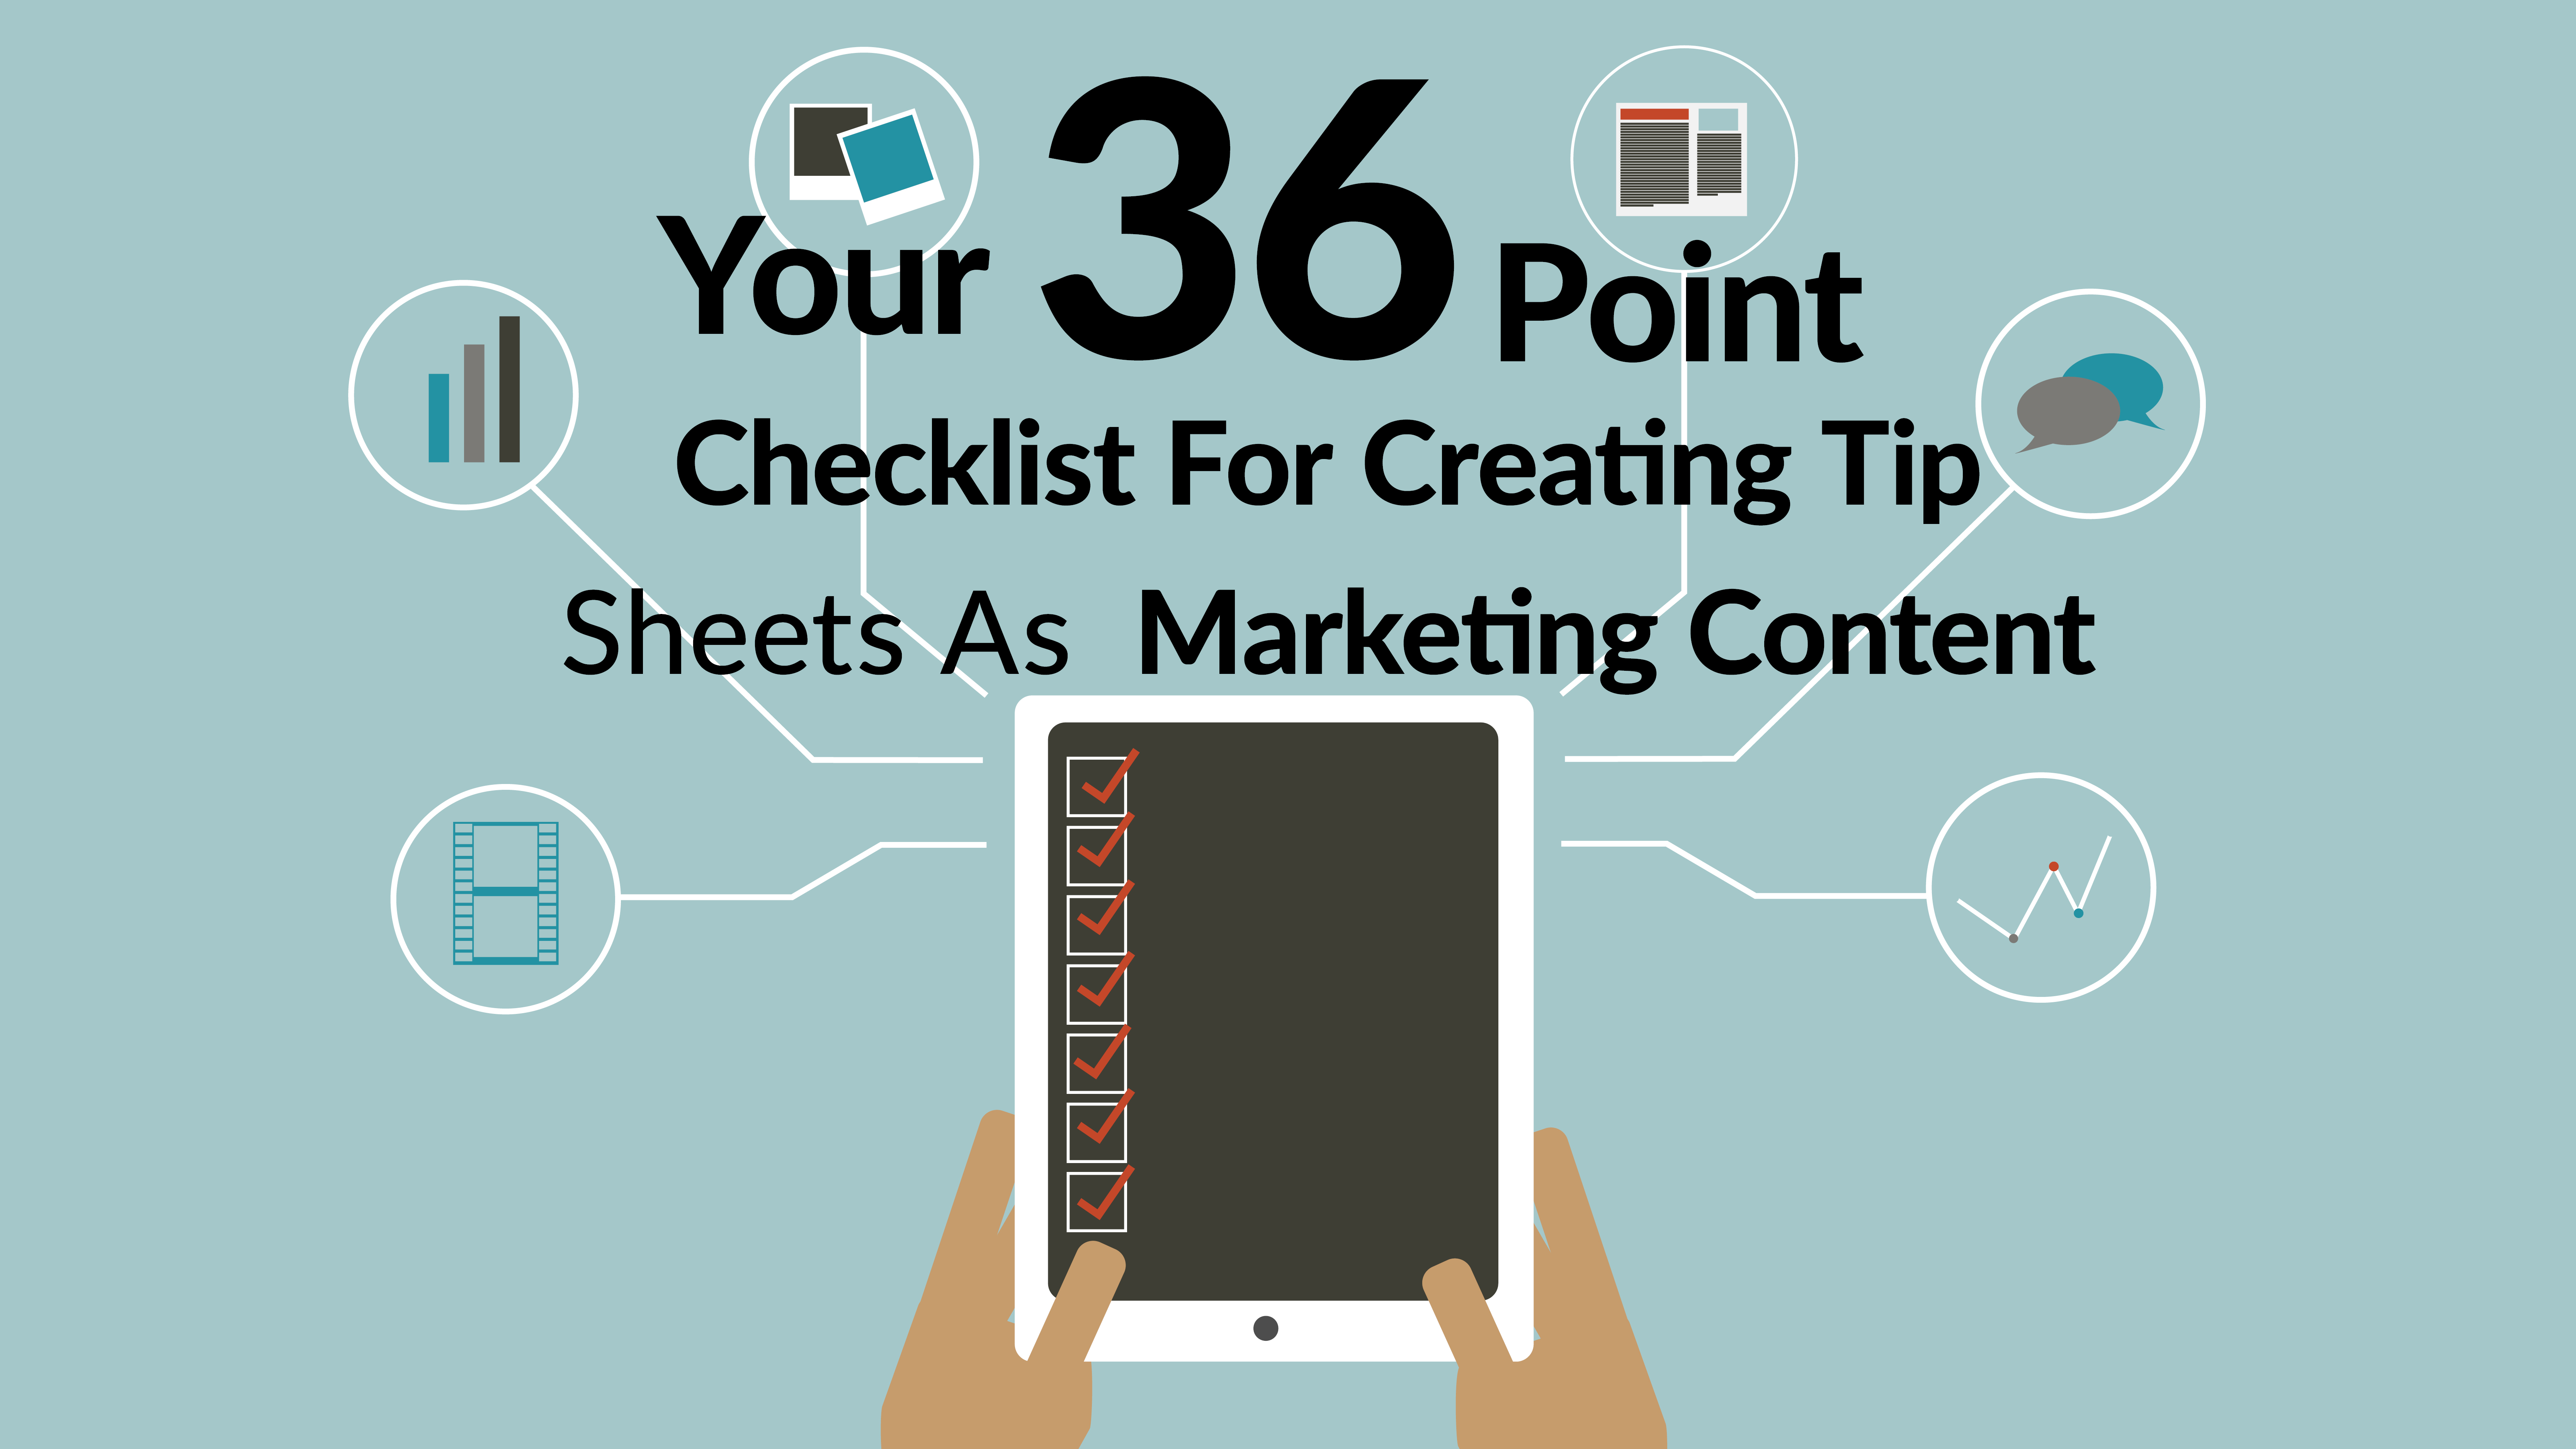 Your 36-Point Checklist For Creating Tip Sheets As Marketing Content